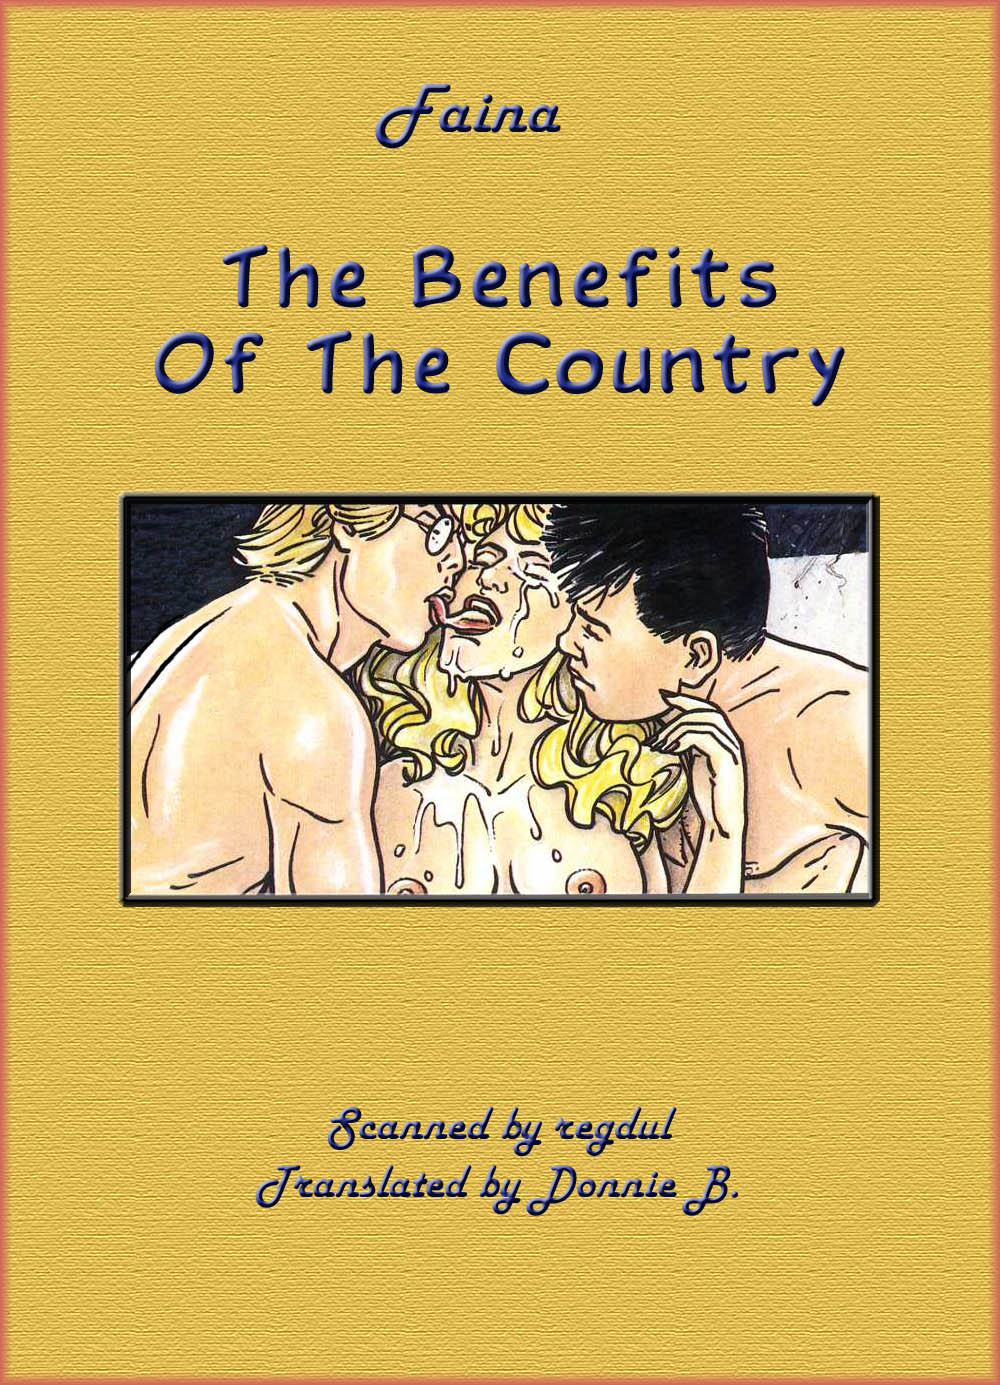 [Fabrizio Faina] The Benefits Of The Country [English] {Donnie B.} 